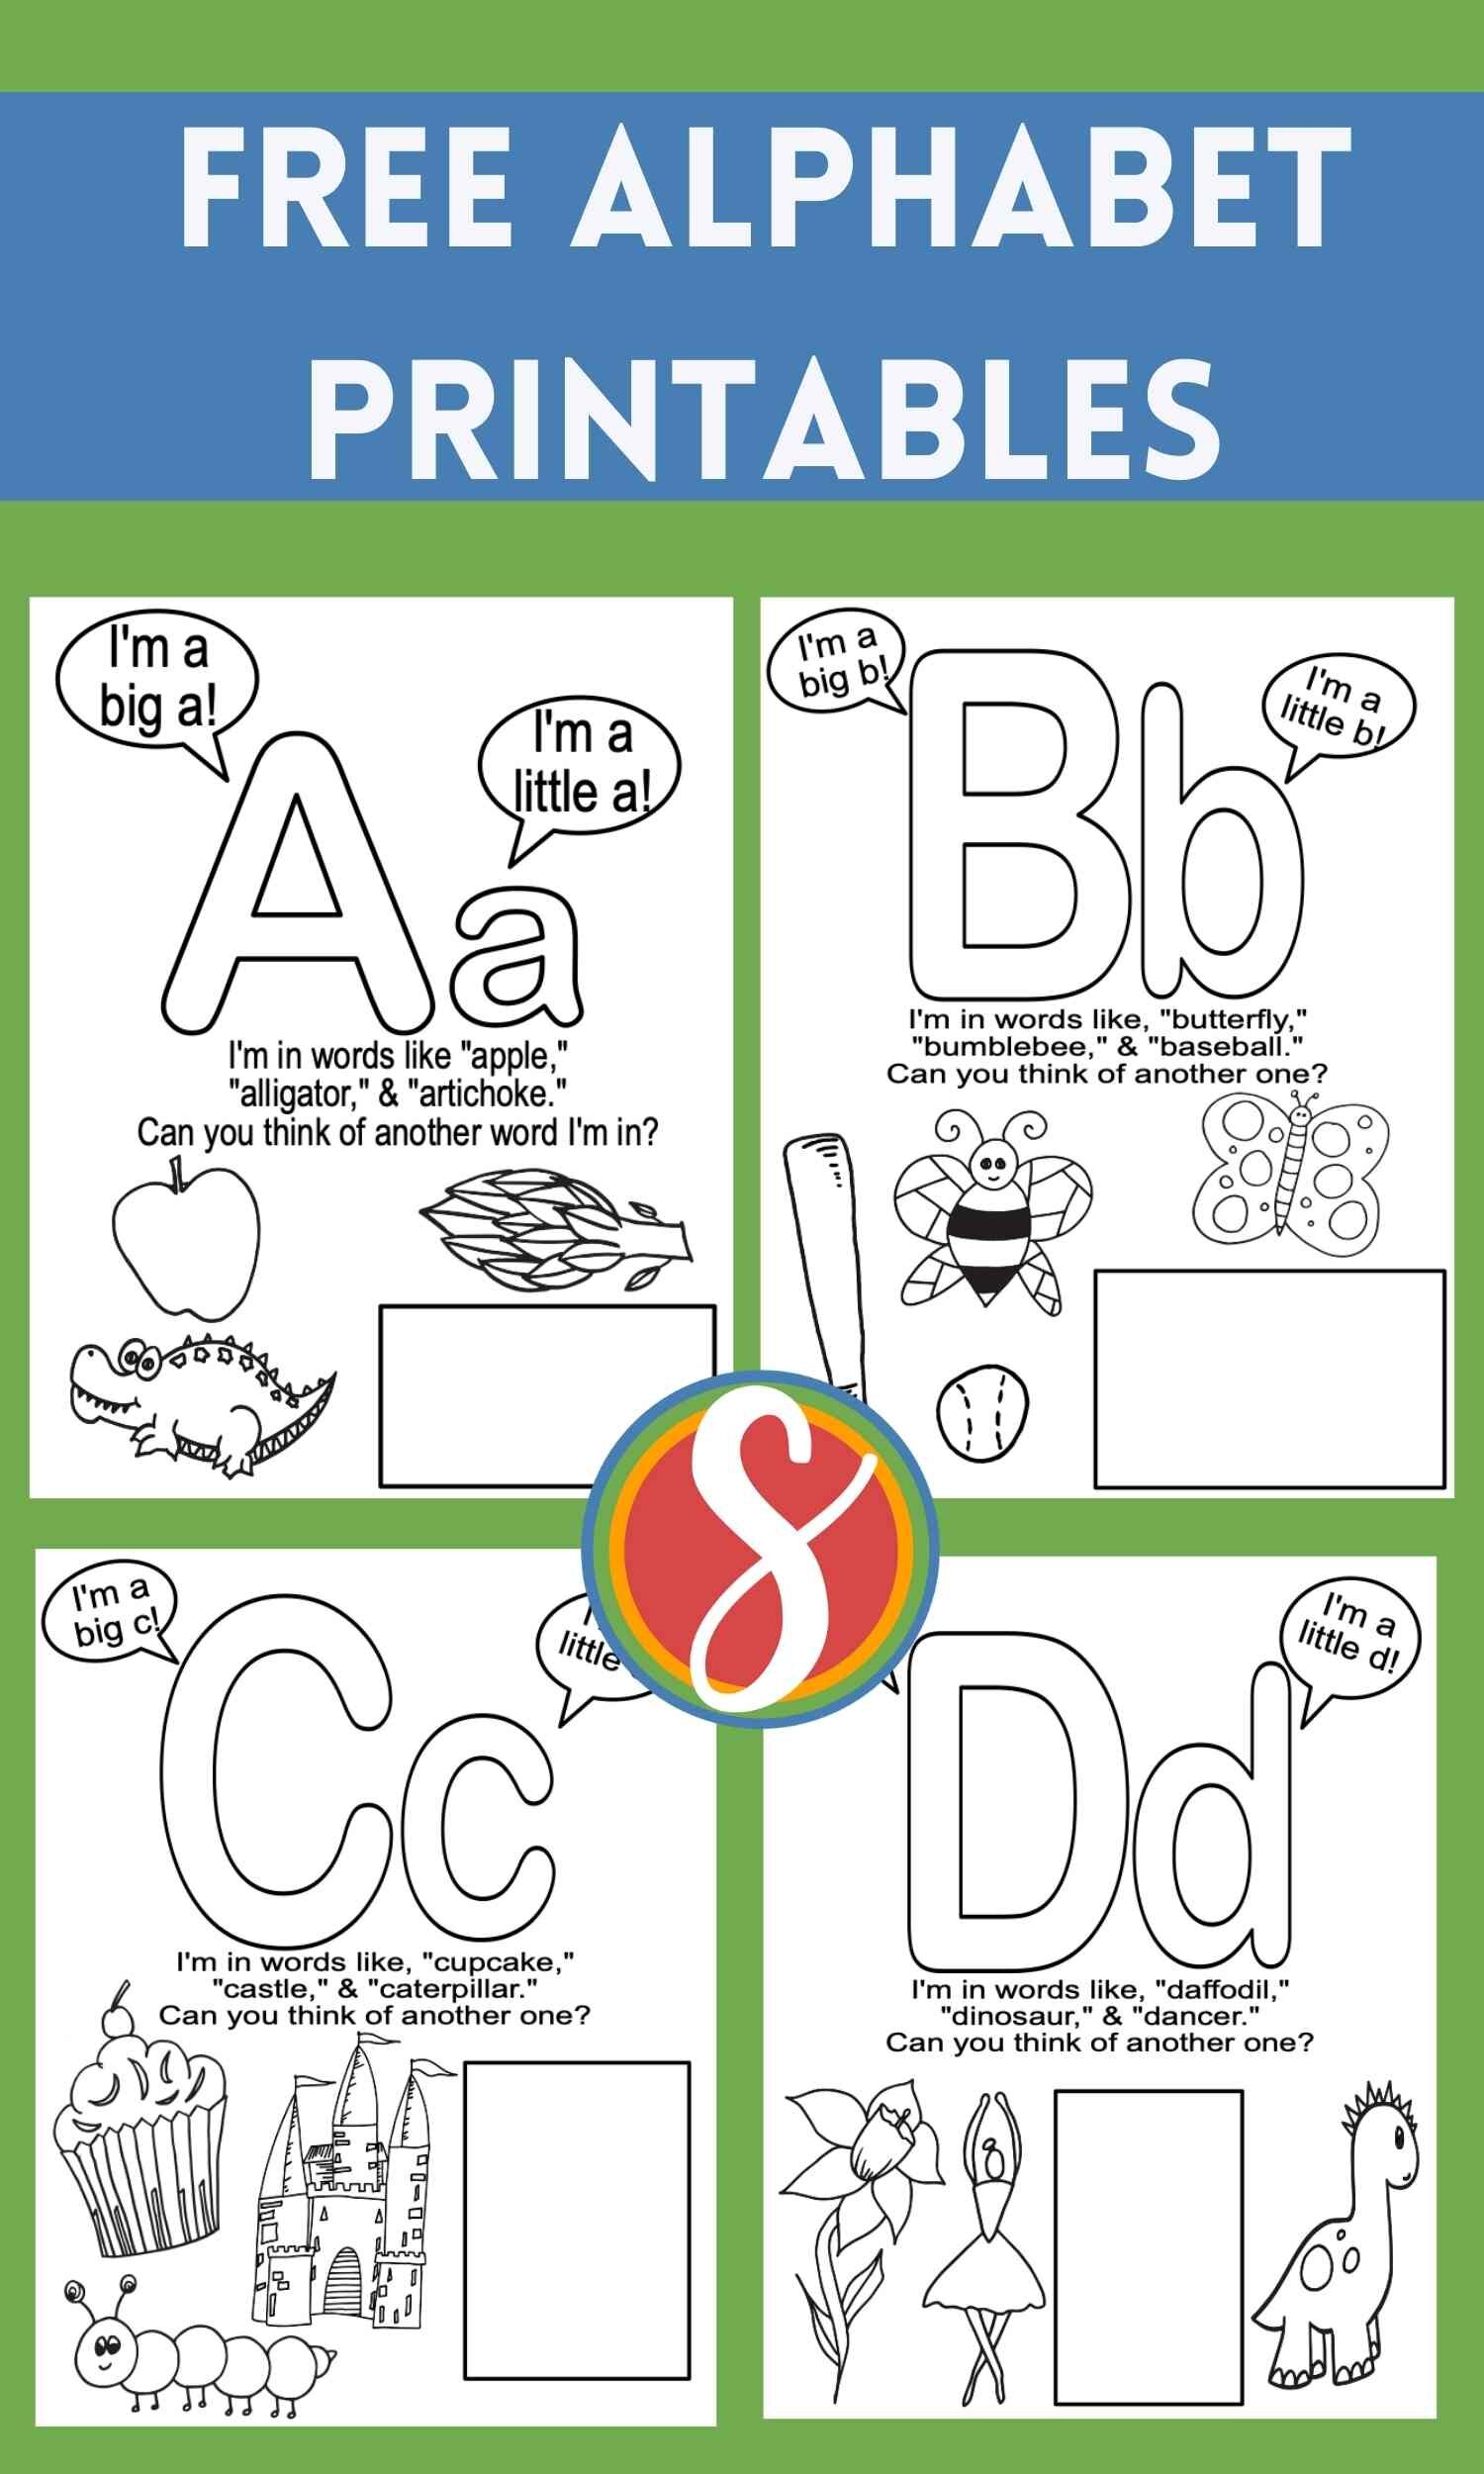 Free alphabet printables from Stevie Doodles! Letter A-Z as printable coloring pages to print and color for your whole class as often as you’d like